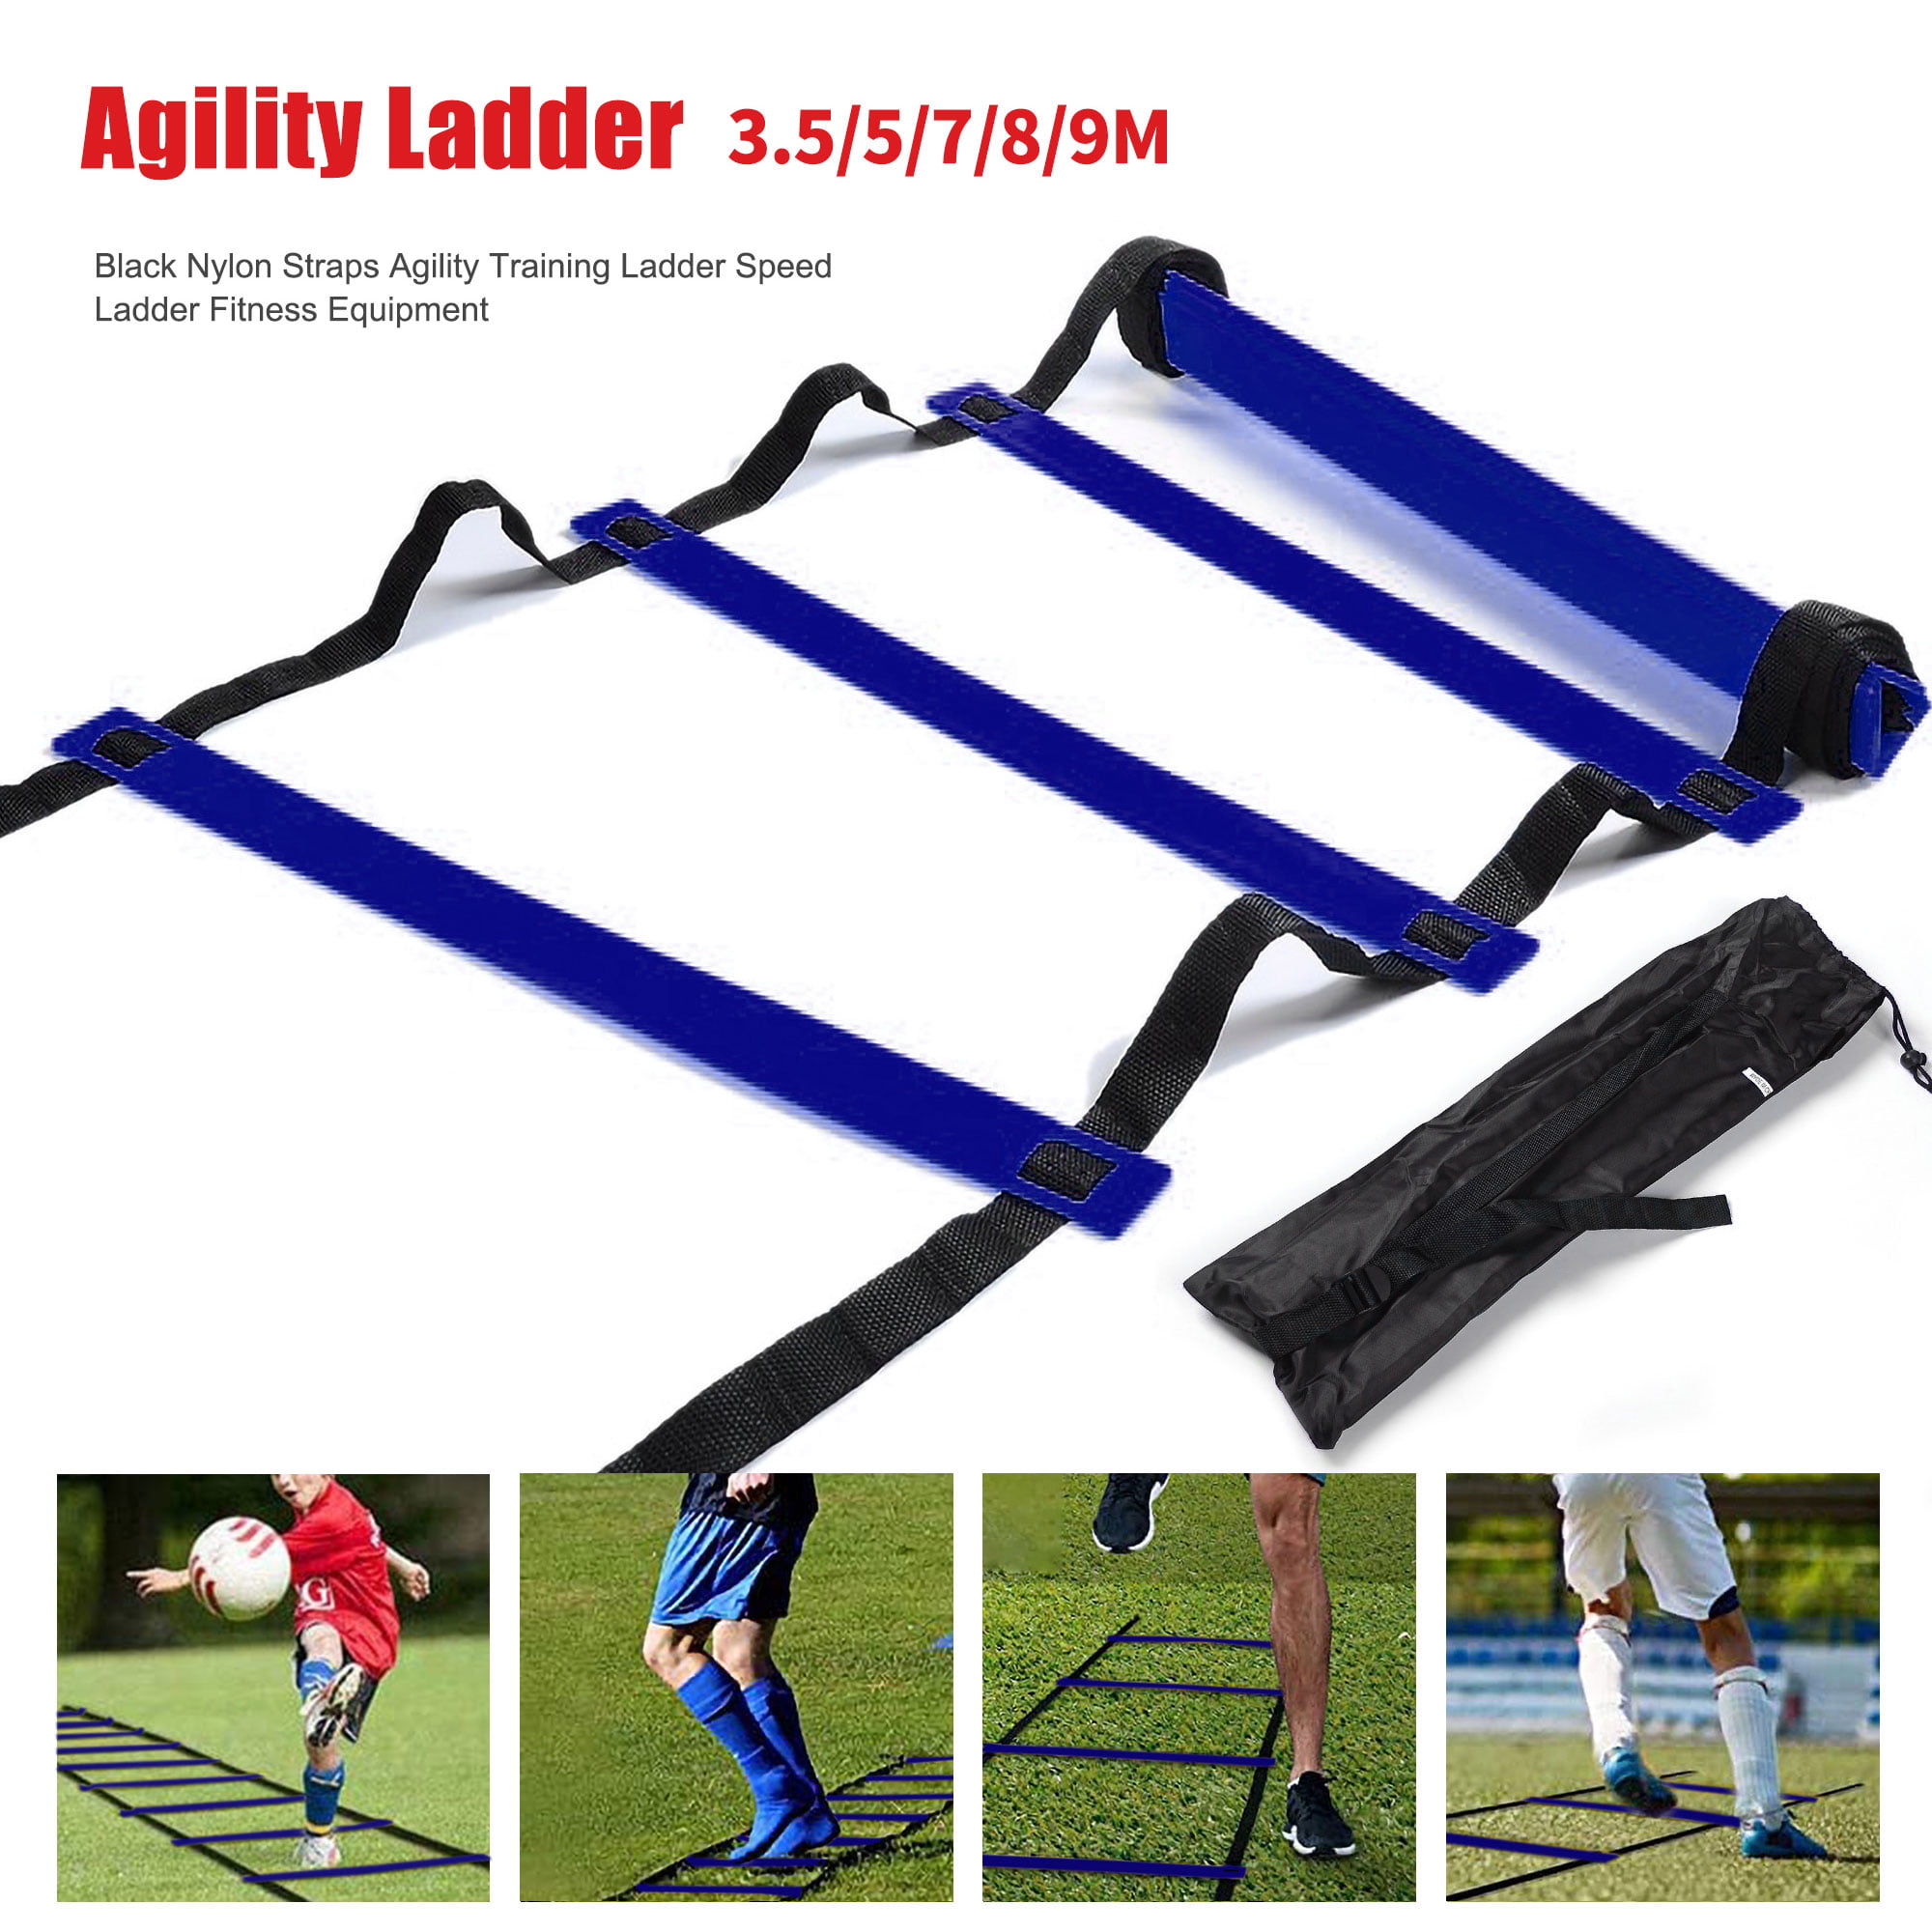 8 Rung Speed Training Ladder AgilityFootwork Football Exercise Workout 